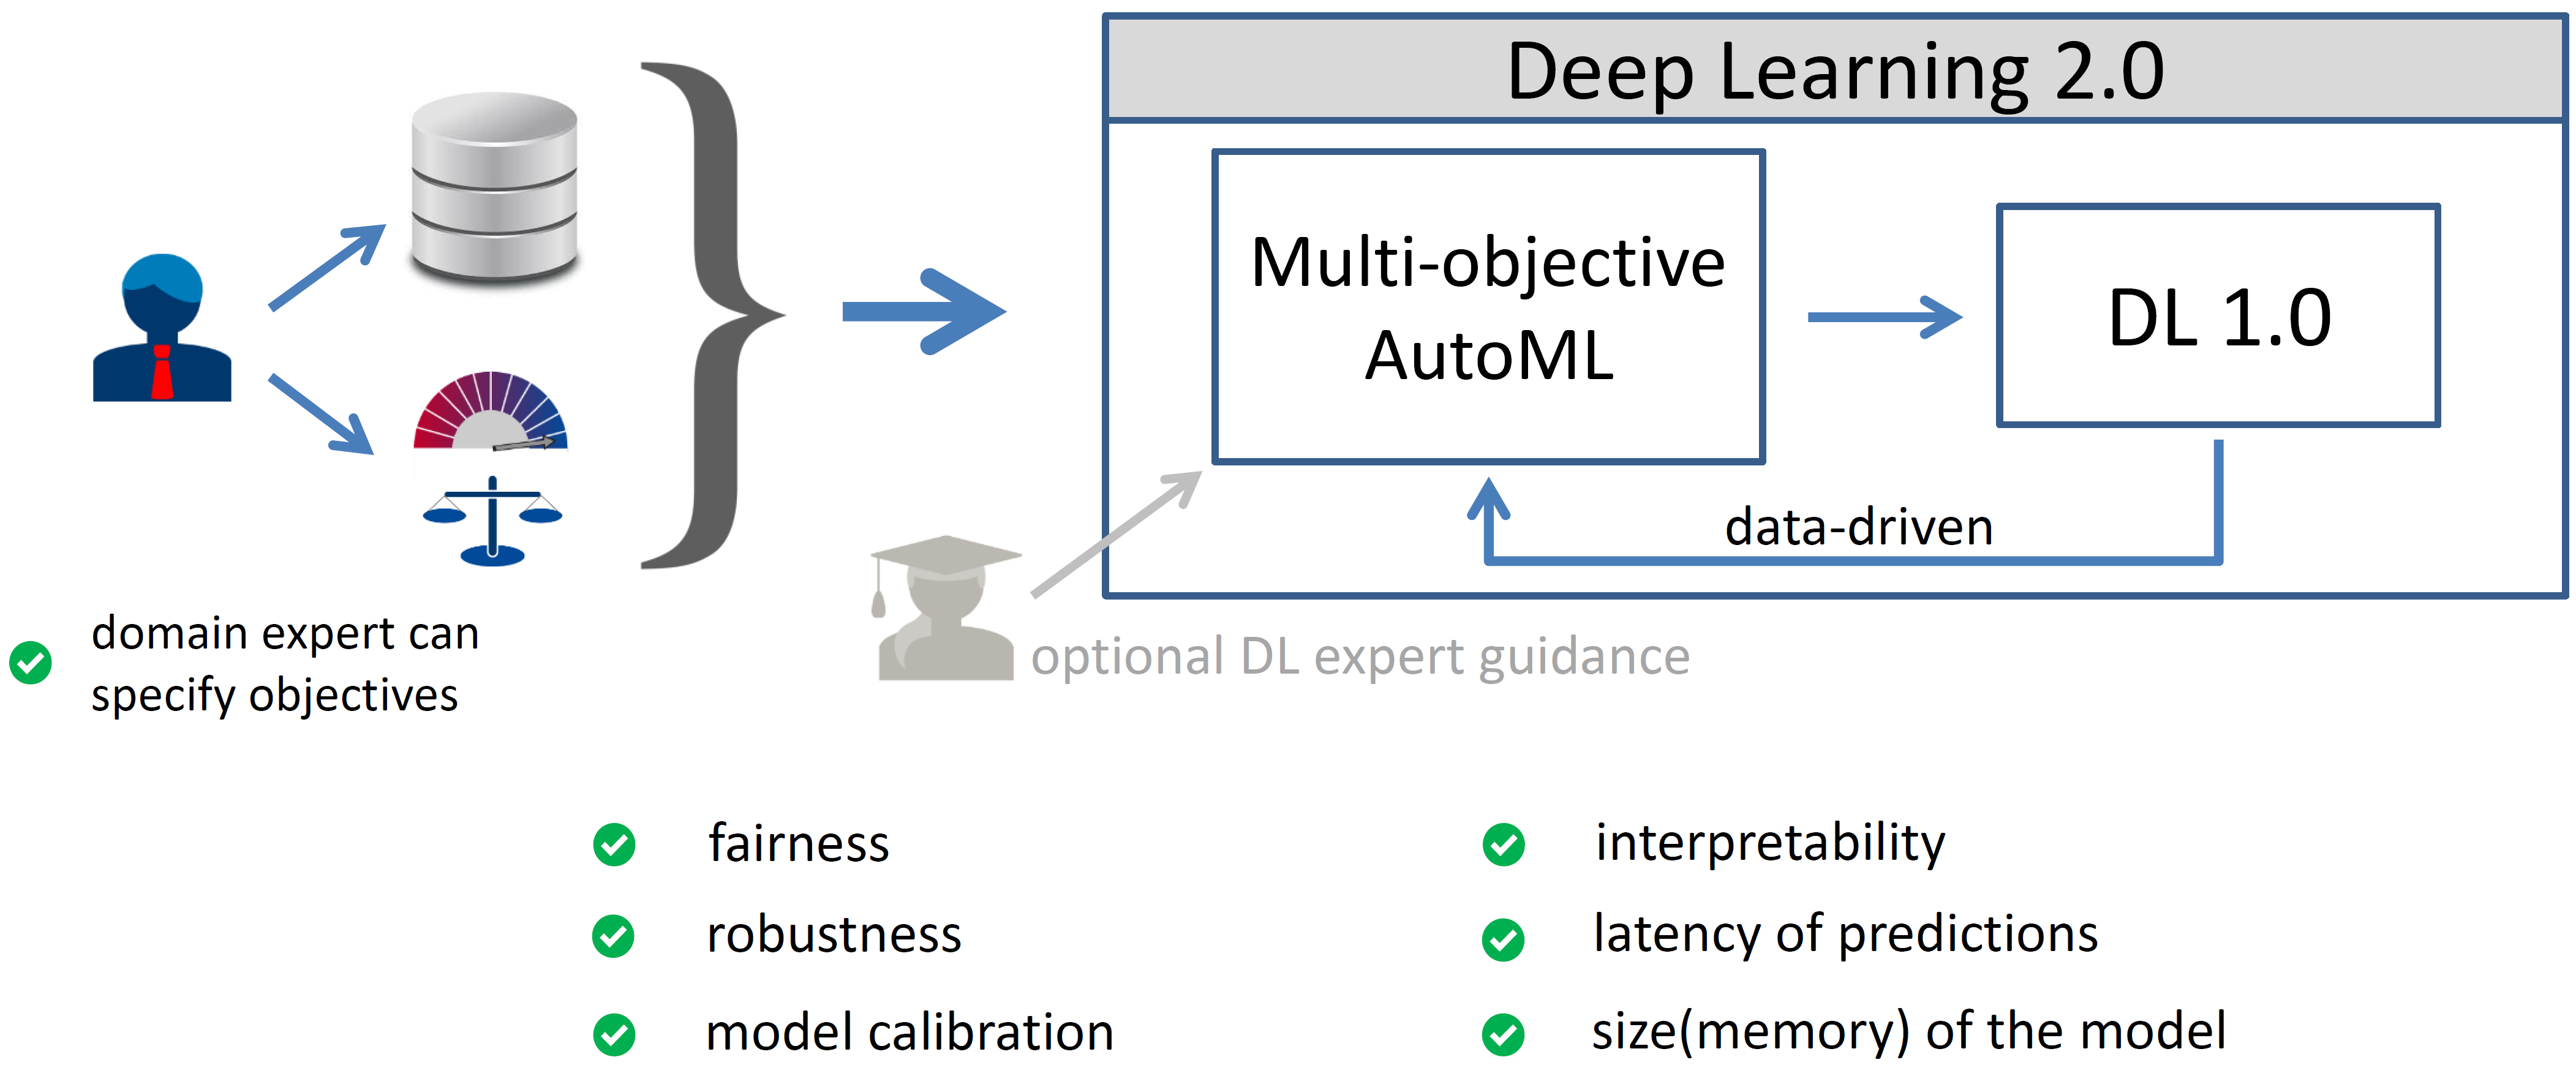 AutoML  Deep Learning 2.0: Extending the Power of Deep Learning